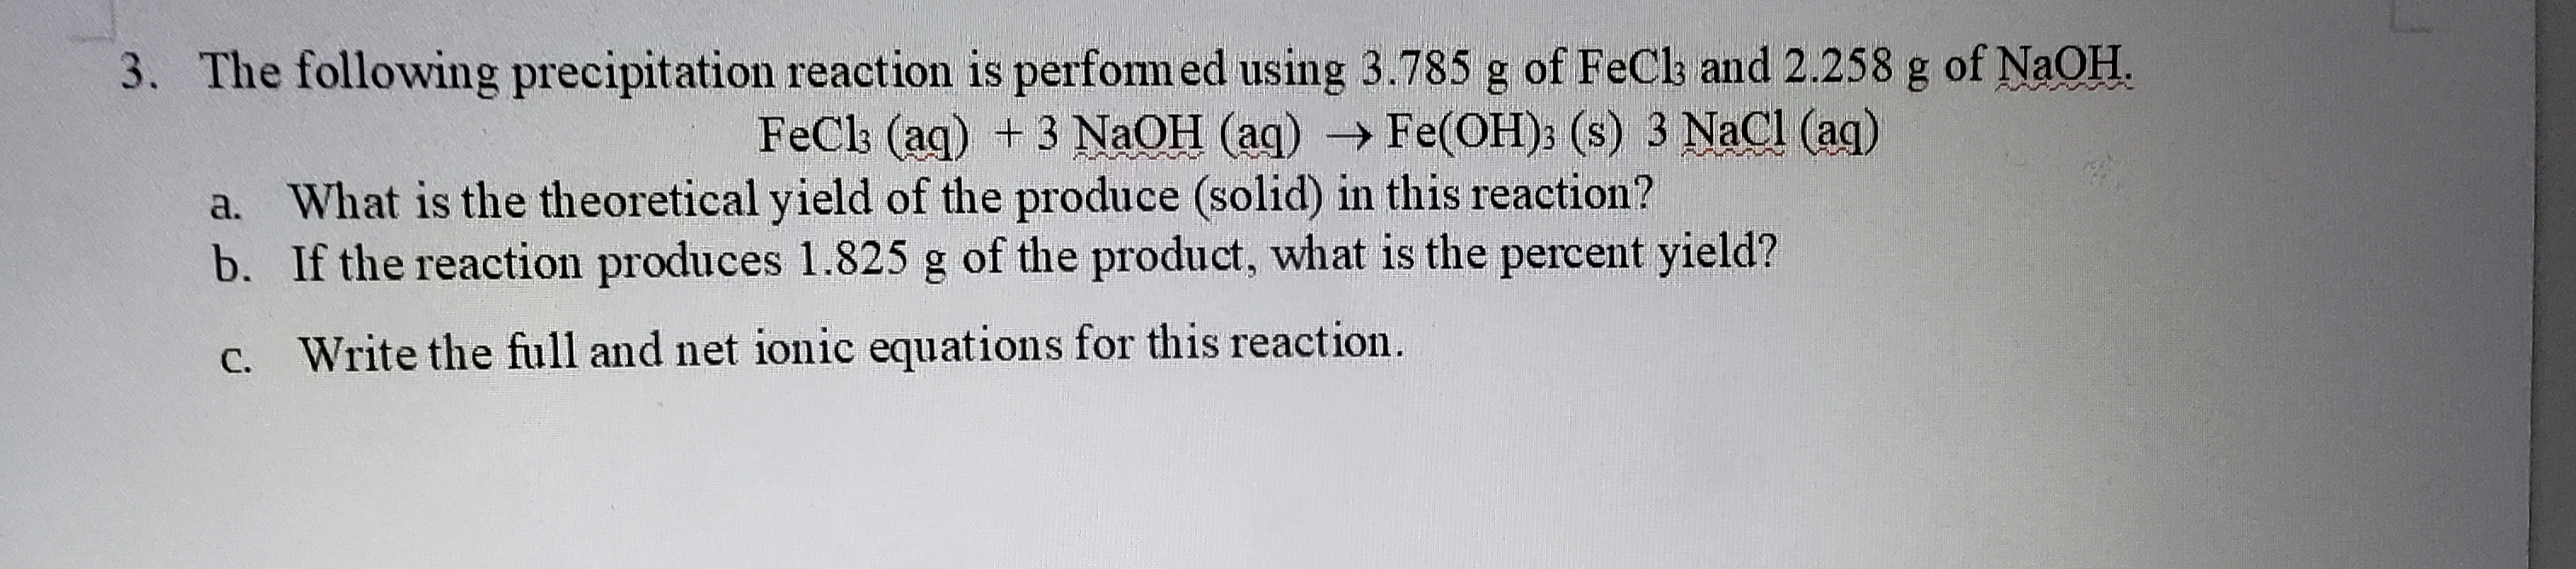 The following precipitation reaction is perfomed using 3.785 g of FeCk and 2.258 g of NaOH.
FeCk (aq) +3 NaOH (aq) Fe(OH): (s) 3 NaCl (ag)
a. What is the theoretical yield of the produce (solid) in this reaction?
b. If the reaction produces 1.825 g of the product, what is the percent yield?
c. Write the full and net ionic equations for this reaction.
